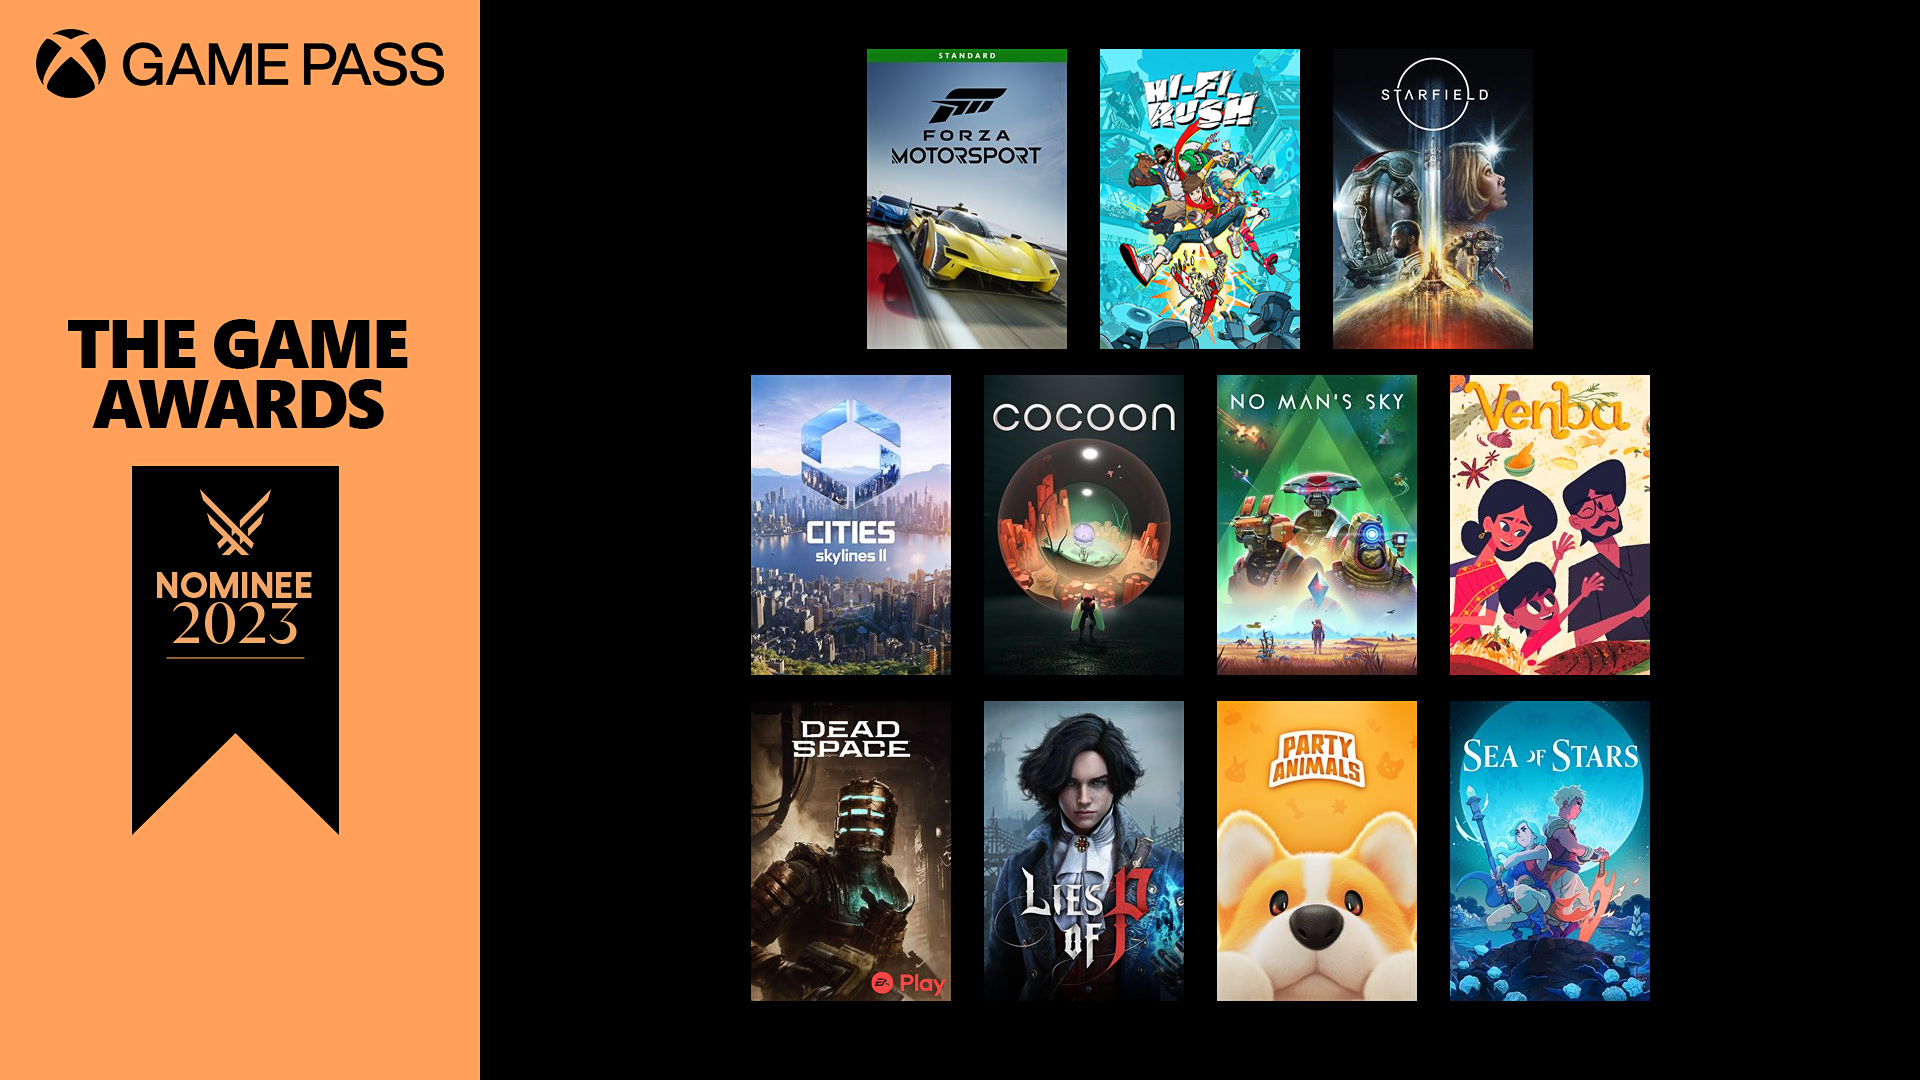 Orange and black graphic with headline “The Game Awards” and “Nominee 2023” on a banner icon on left side with the Xbox Game Pass logo. On the right side the key art for thirteen video games can be seen: Forza Motorsport, Hi-Fi RUSH, Starfield, Cities Skyline II, Cocoon, No Man’s Sky, Venba, Sea of Stars, Dead Space, Lies of P, Party Animals, League of Legends, and Valorant.